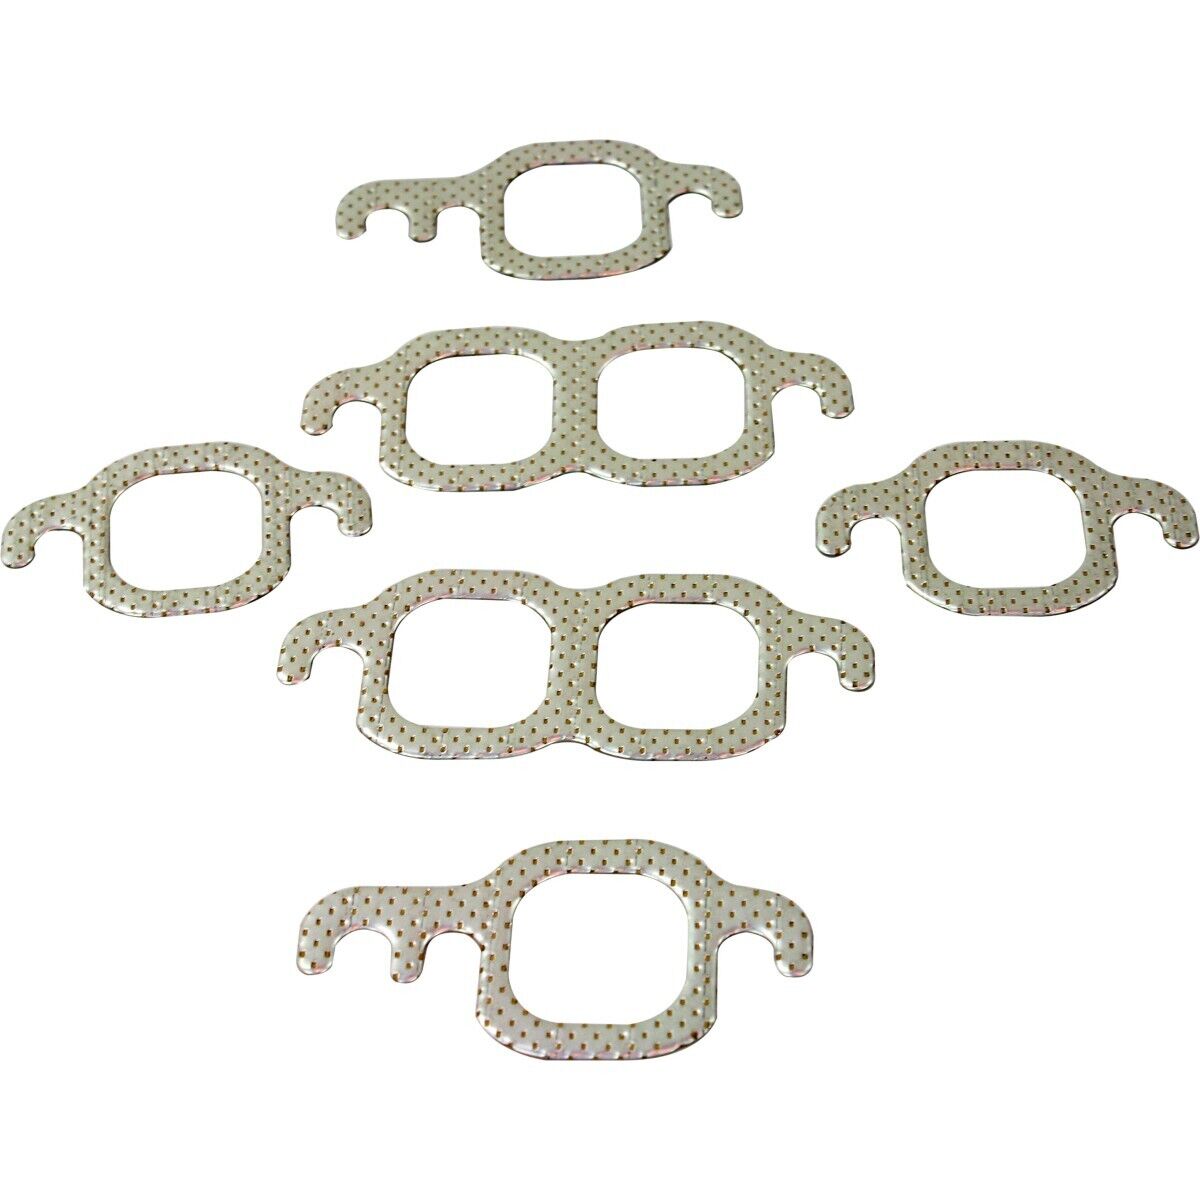 MS9275B Felpro Set of 6 Exhaust Manifold Gaskets for Chevy Express Van Suburban